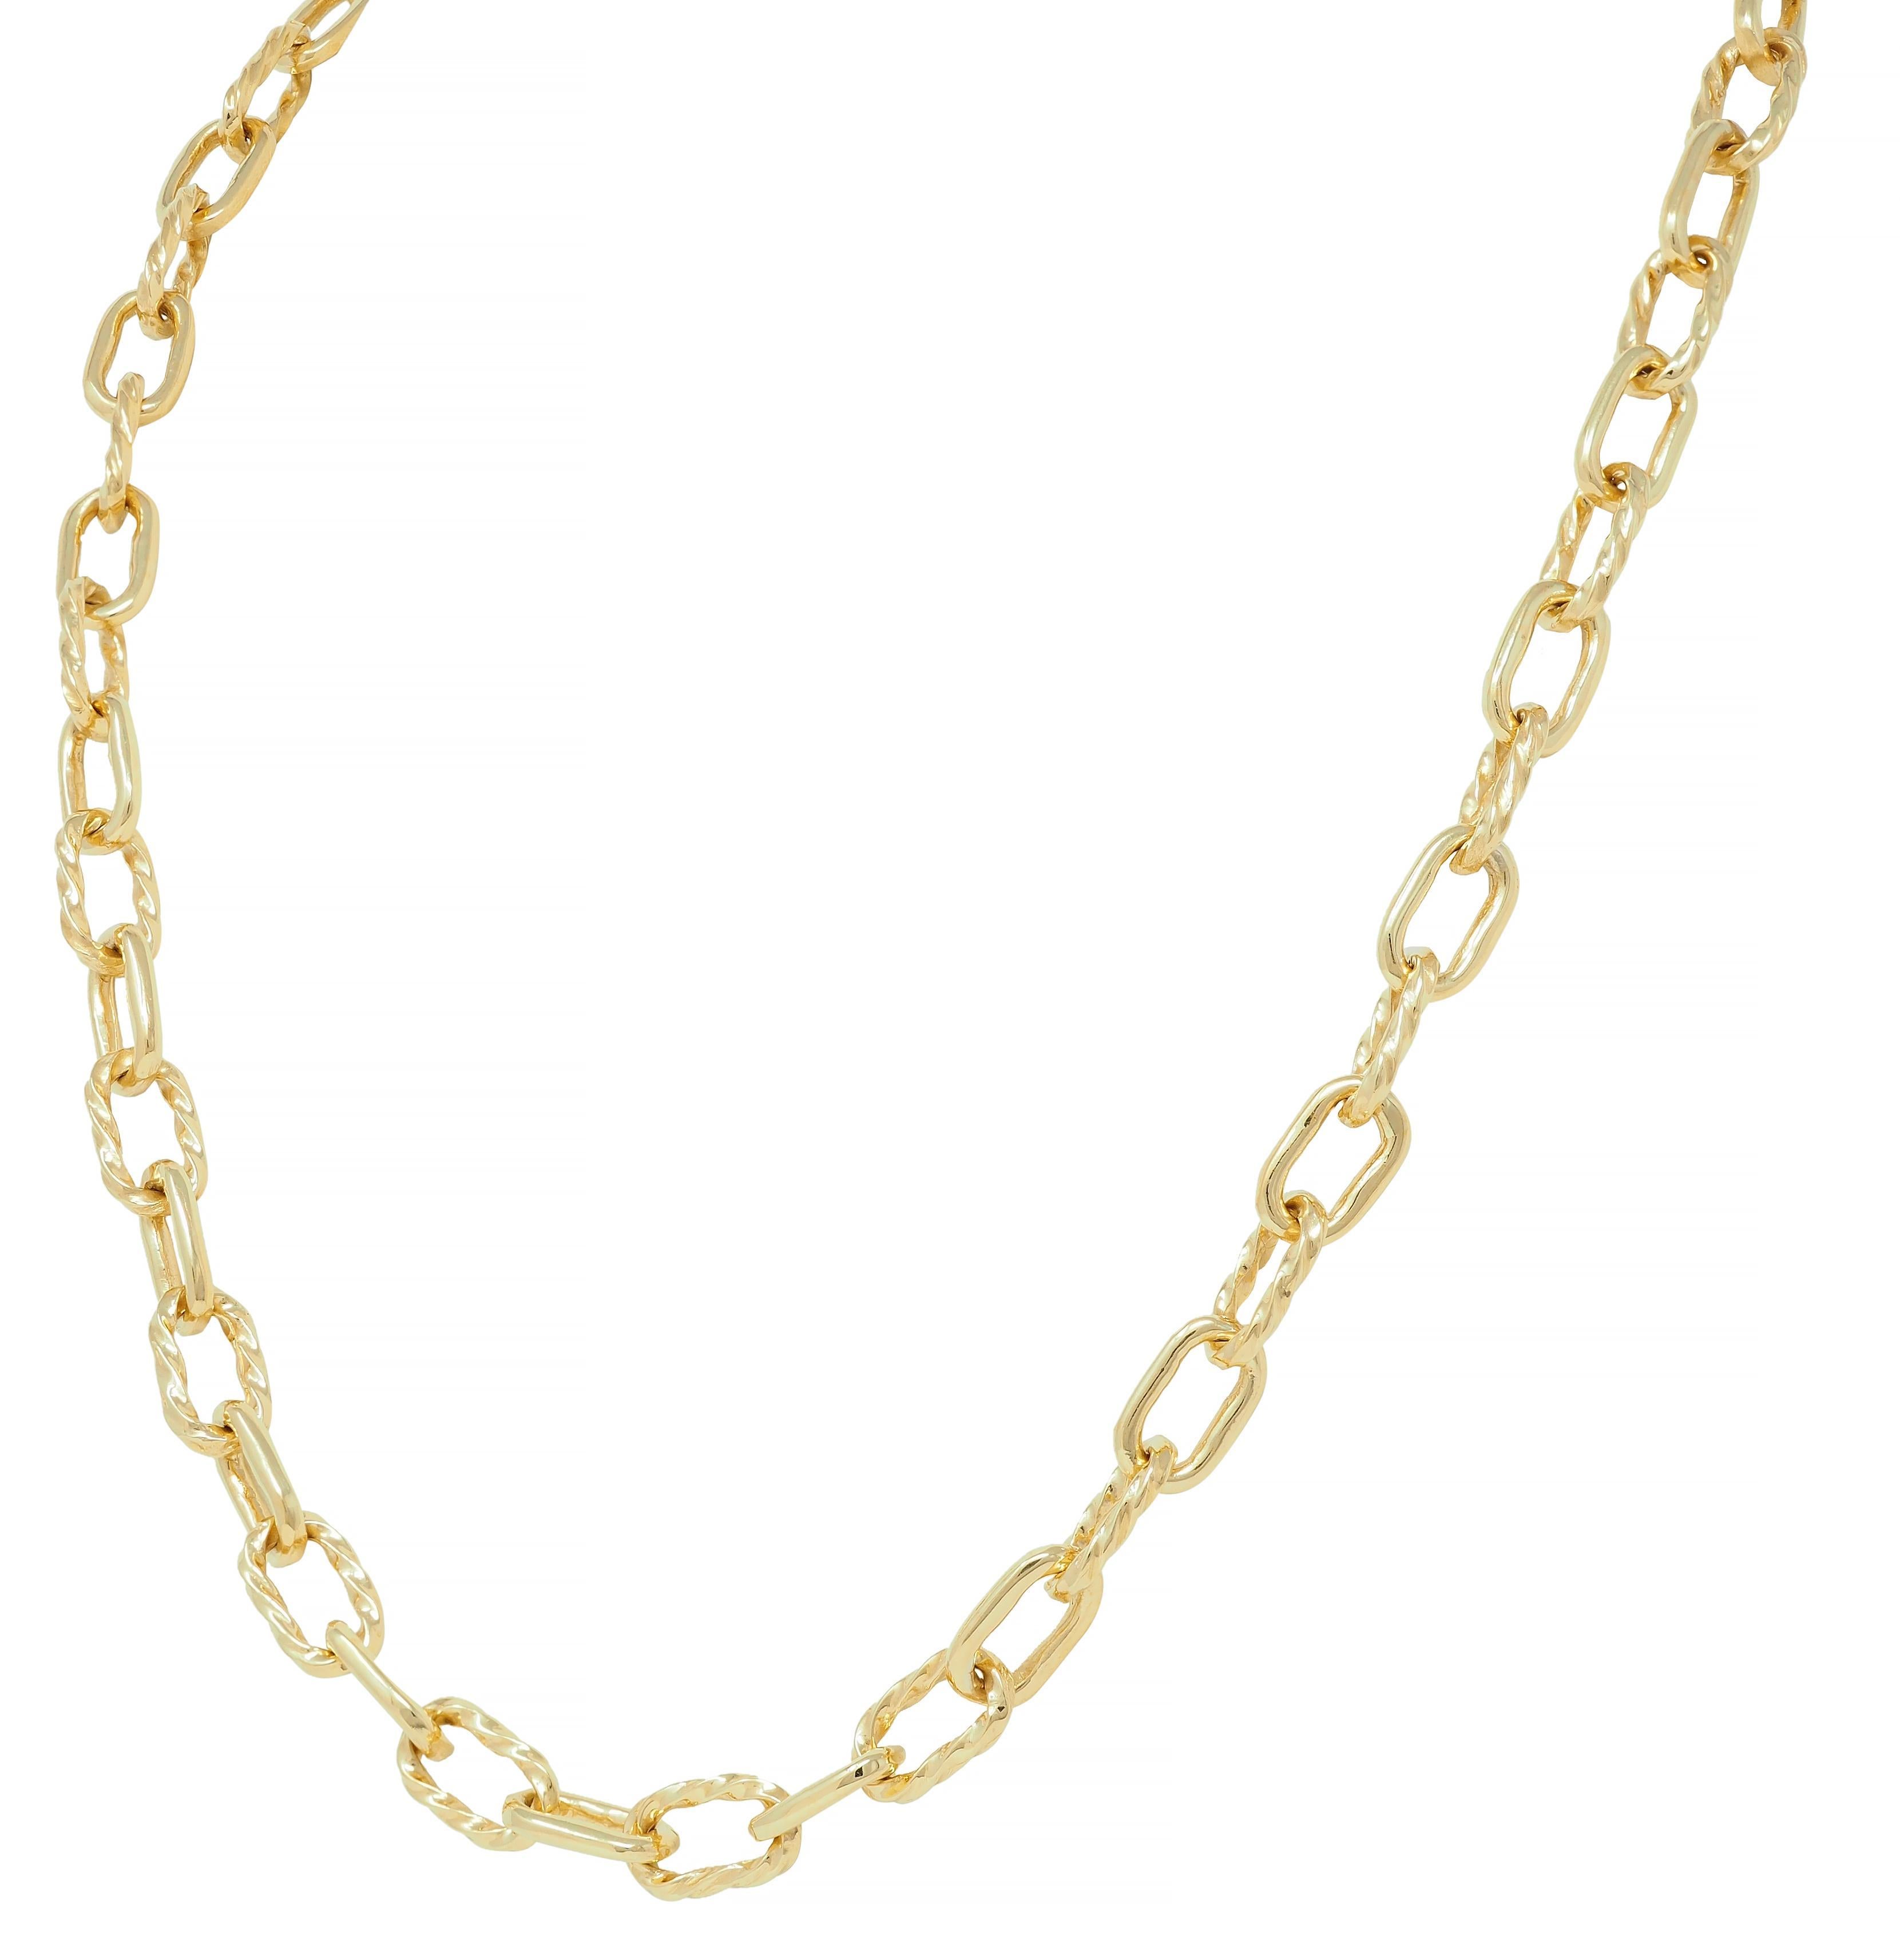 1960's 18 Karat Yellow Gold Twisted Cable Link Vintage Chain Necklace For Sale 1